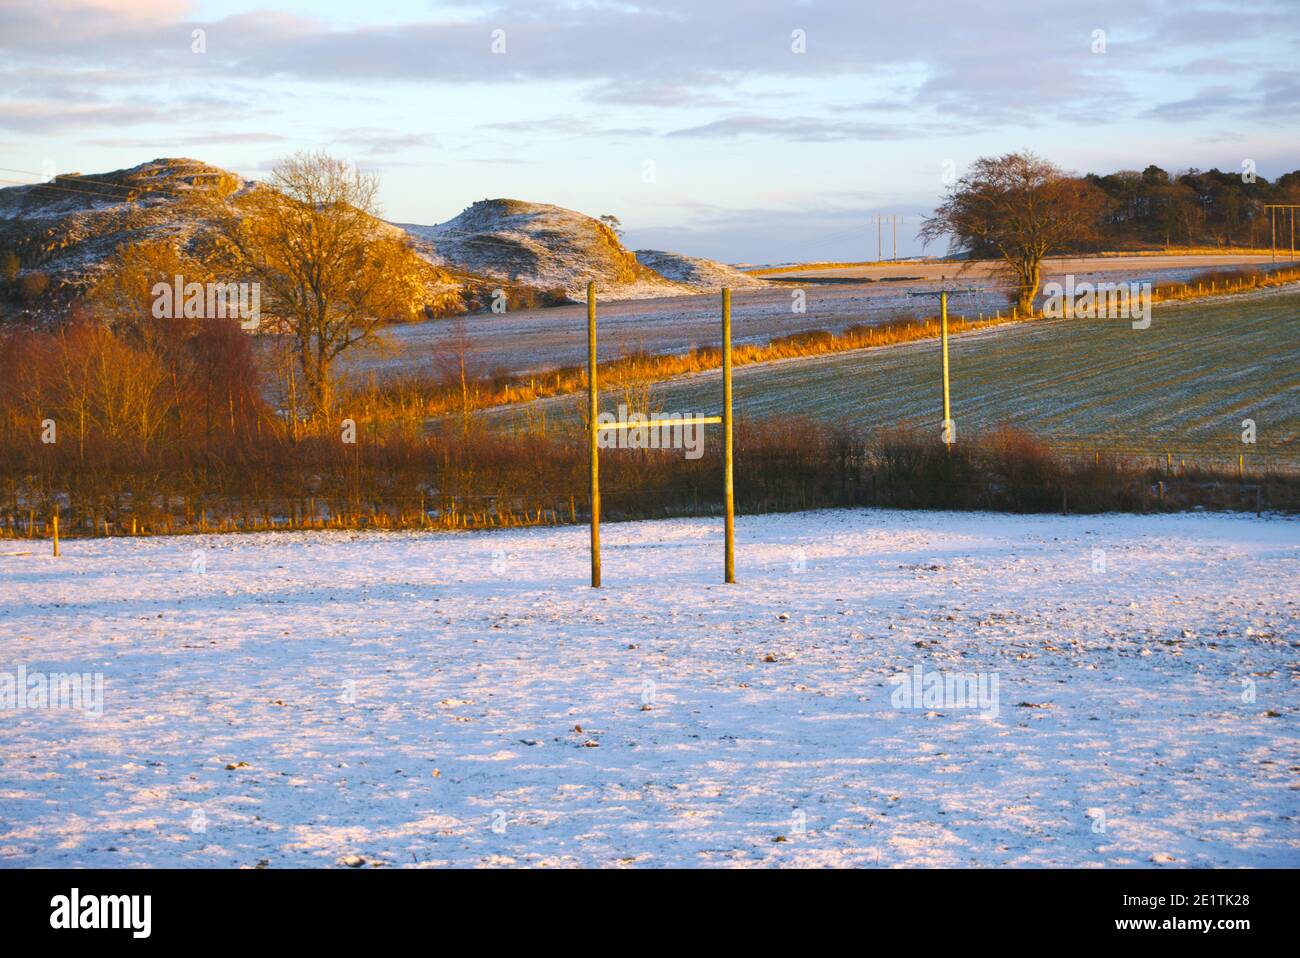 Rugby goalposts in a snowy field with trees, farmland and hills illuminated by a winter sunset, Berwickshire, Scottish Borders, Scotland, UK. Stock Photo